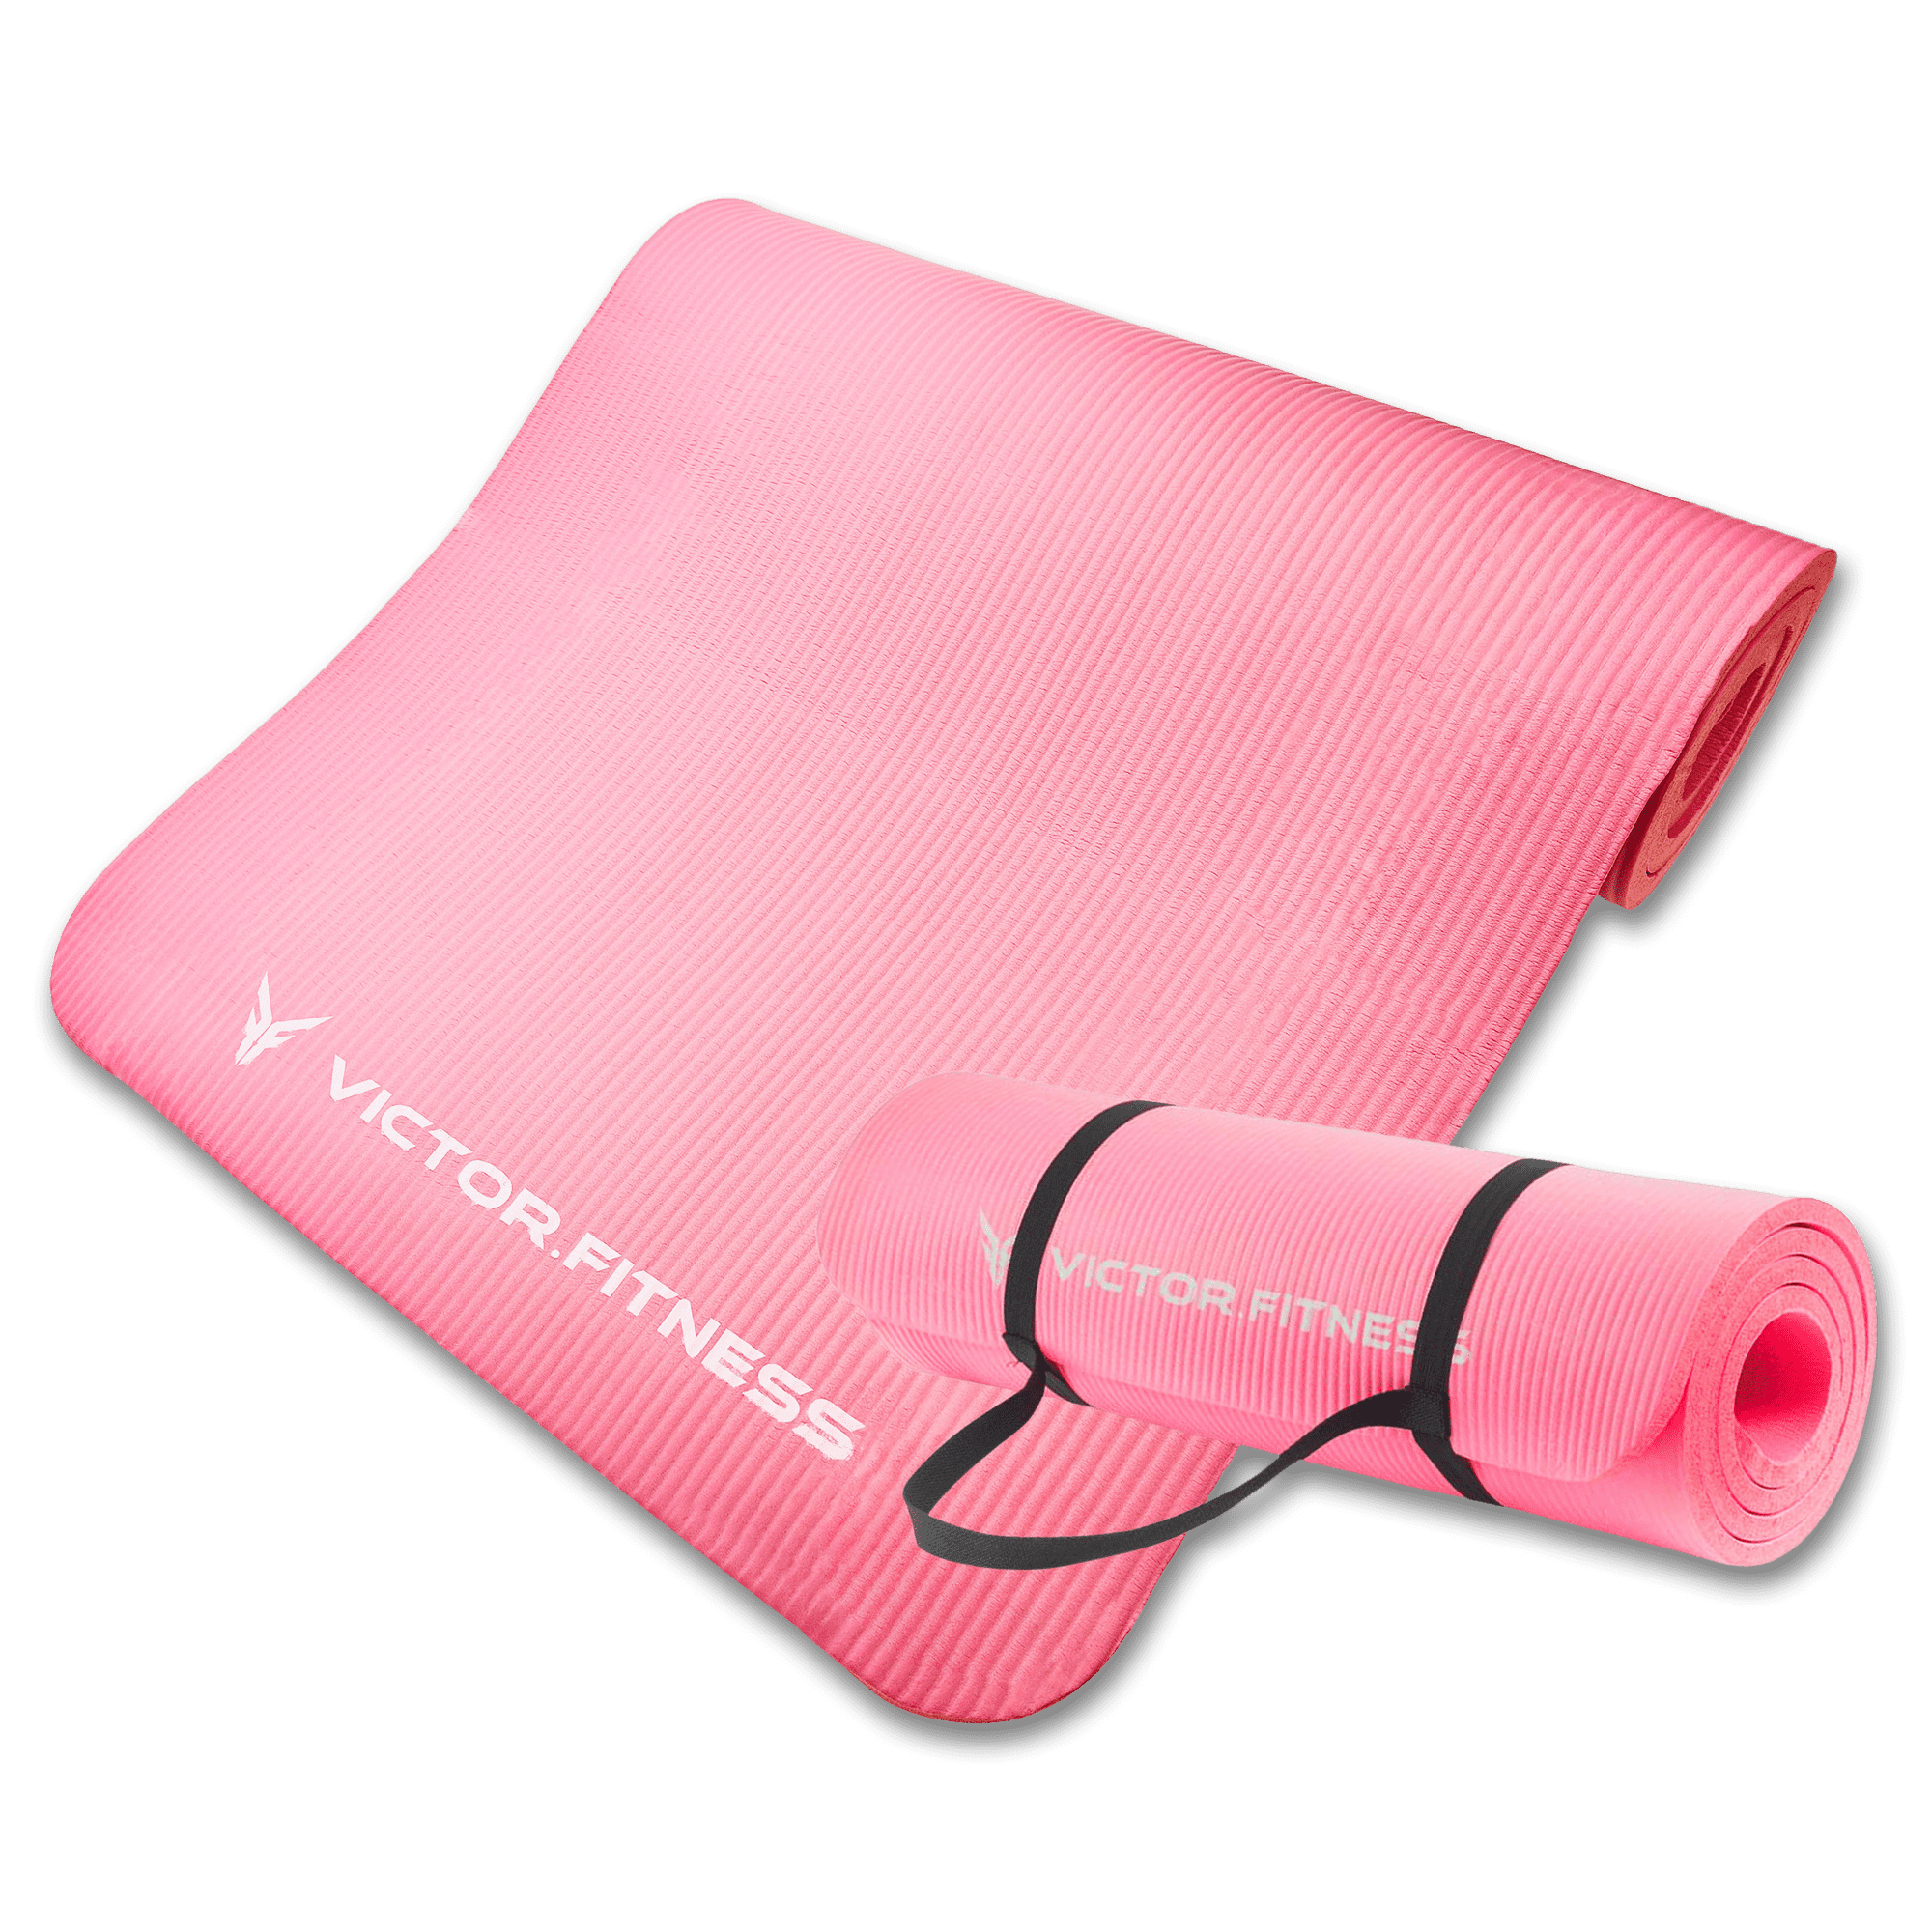 Thick Anti-Slip Exercise Yoga Mat with Carrying Strap – Victor Fitness